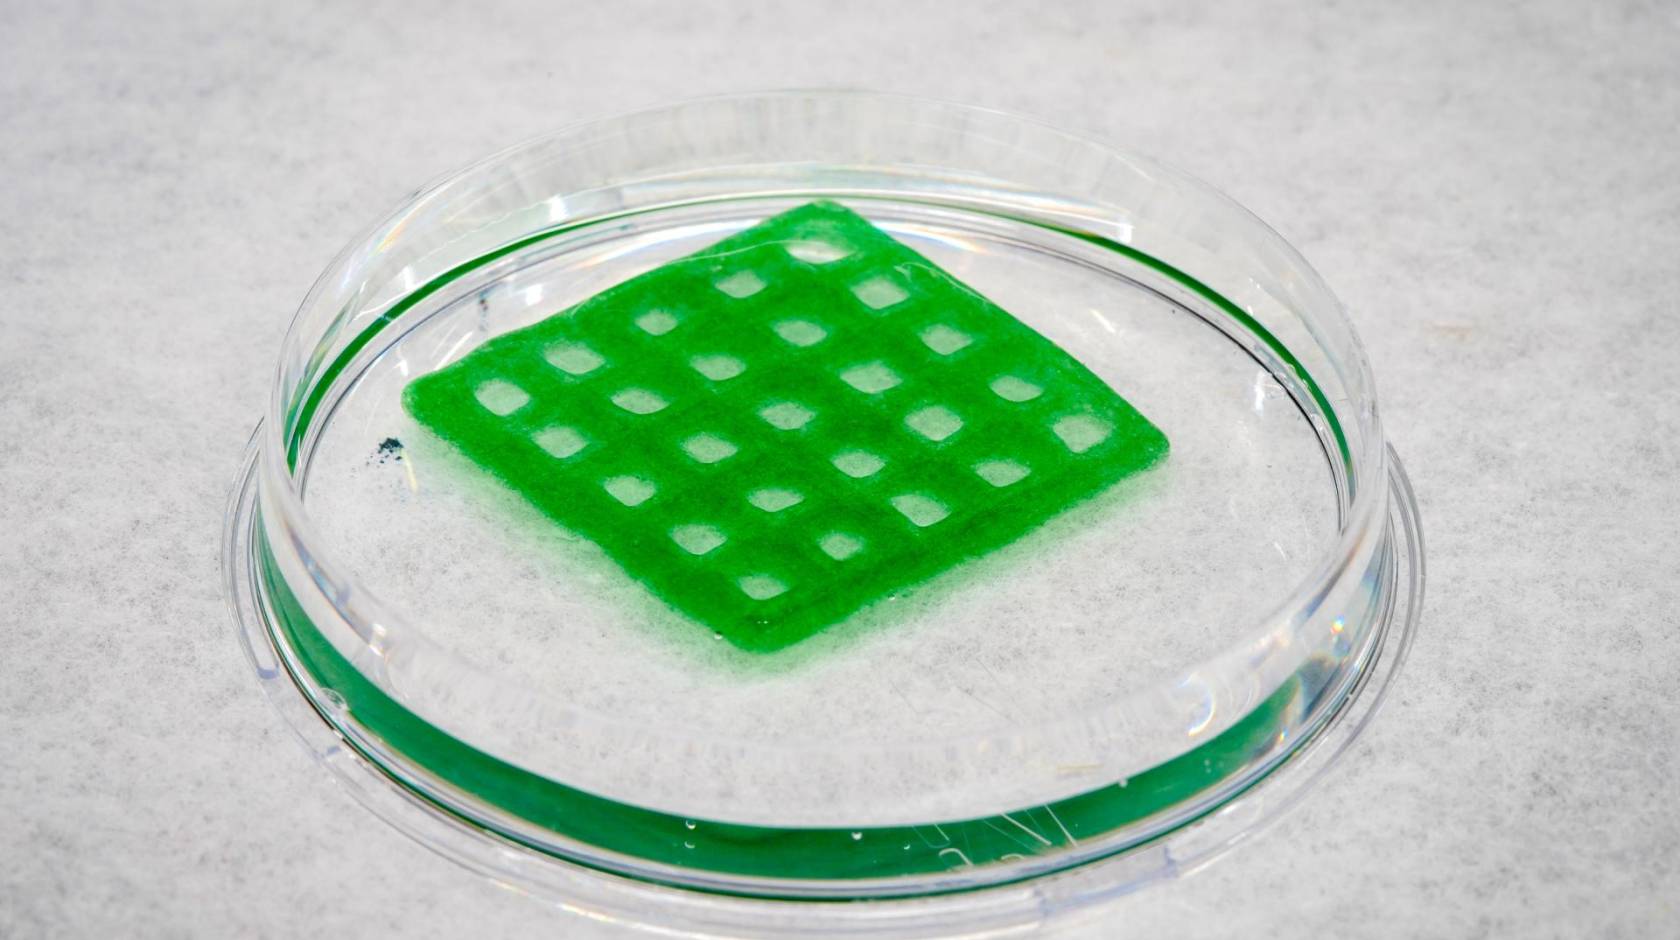 A transparent liquidish disc with a green grid on top of it